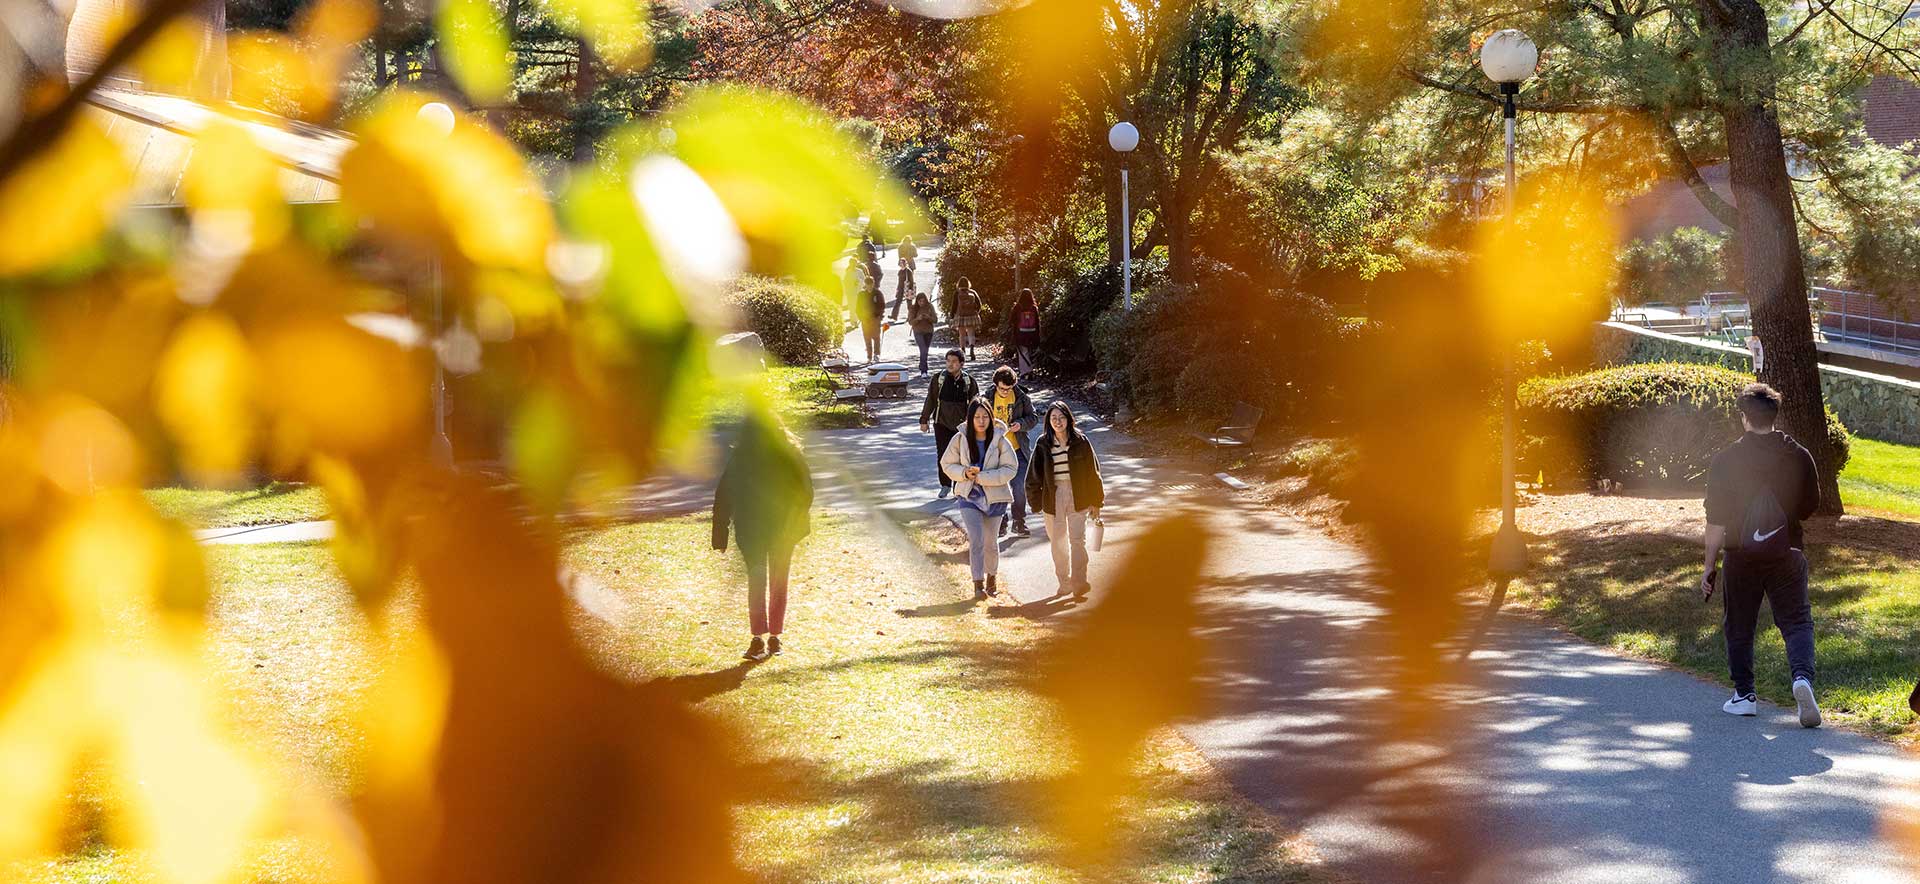 View of looking through yellow leaves at students walking down a pathway on campus